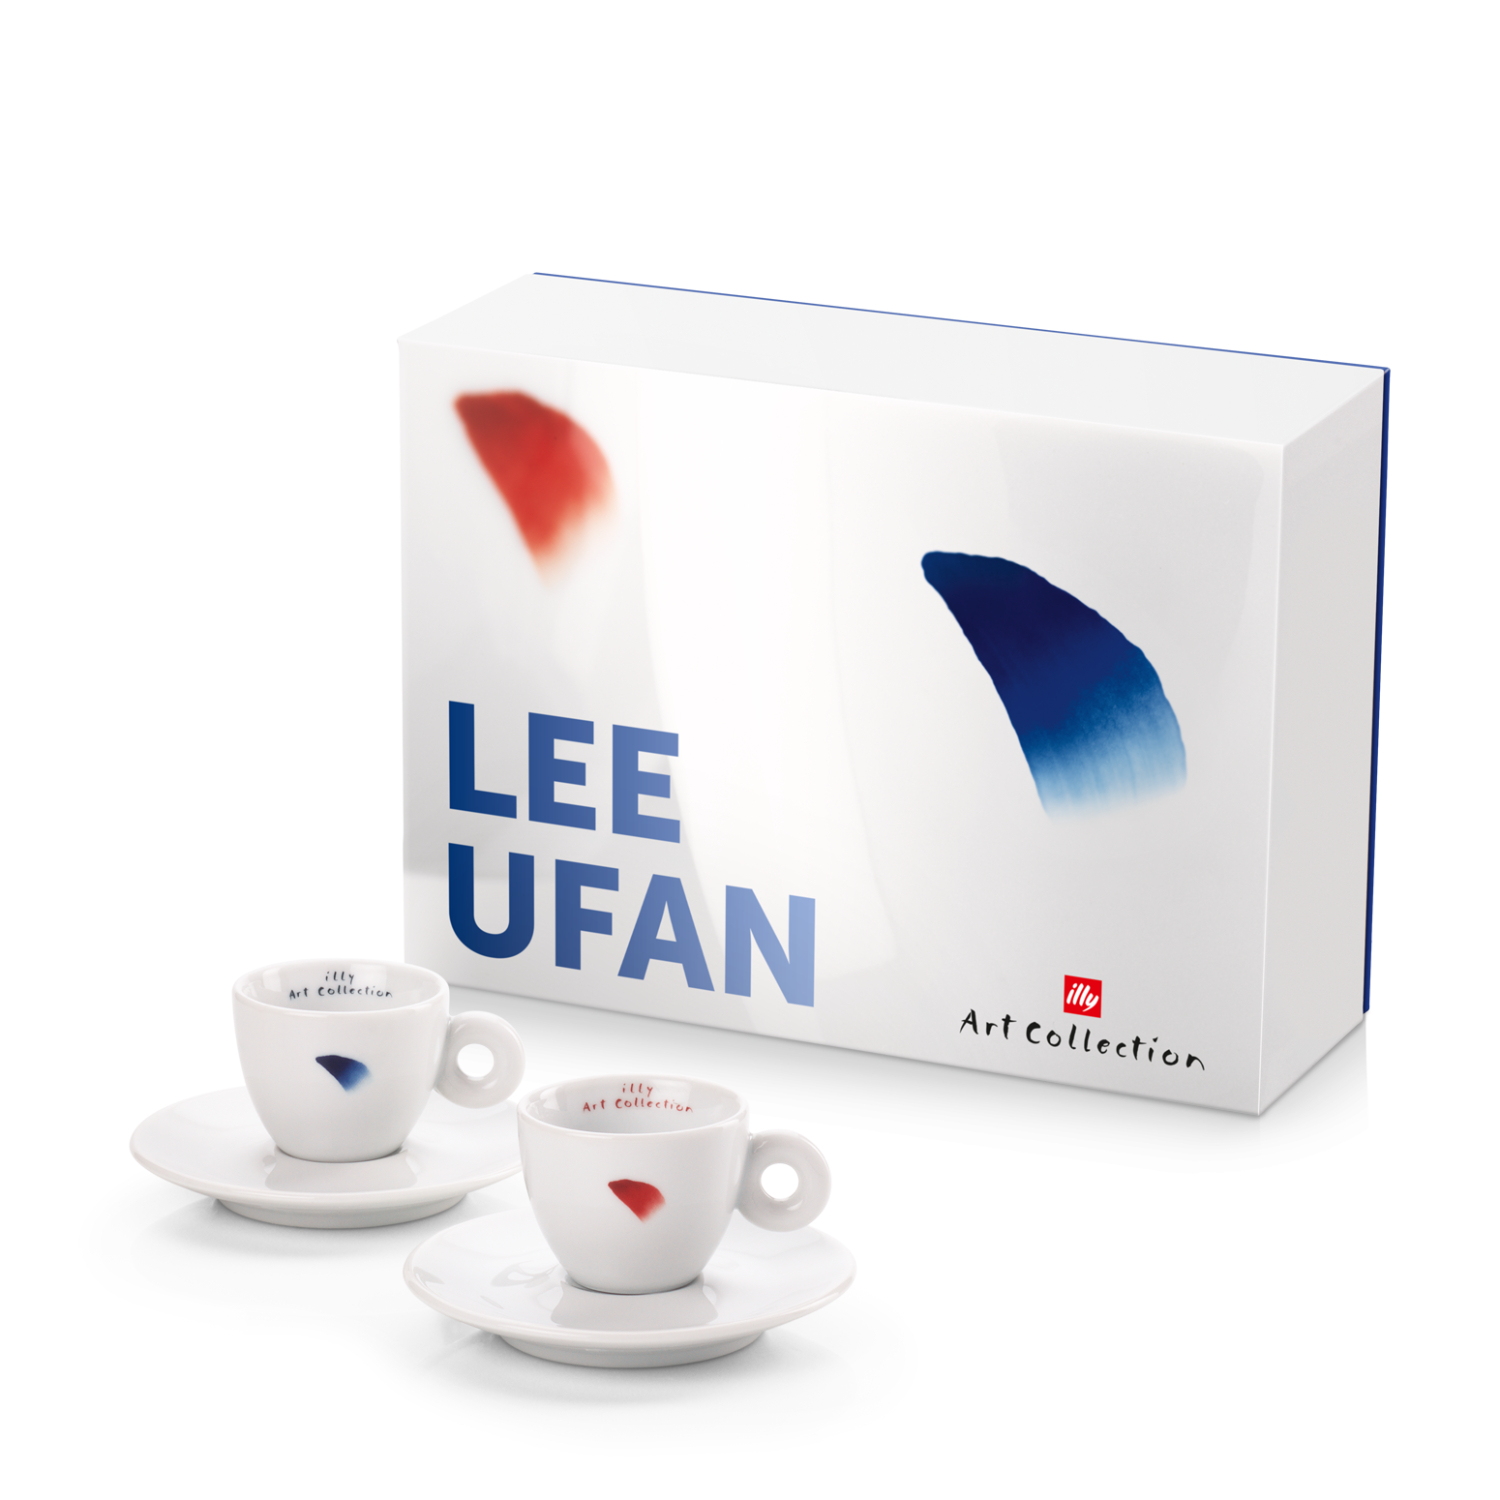 illy Art Collection LEE UFAN Gift Set 2 Espresso Cups, Cups, 02-02-2017